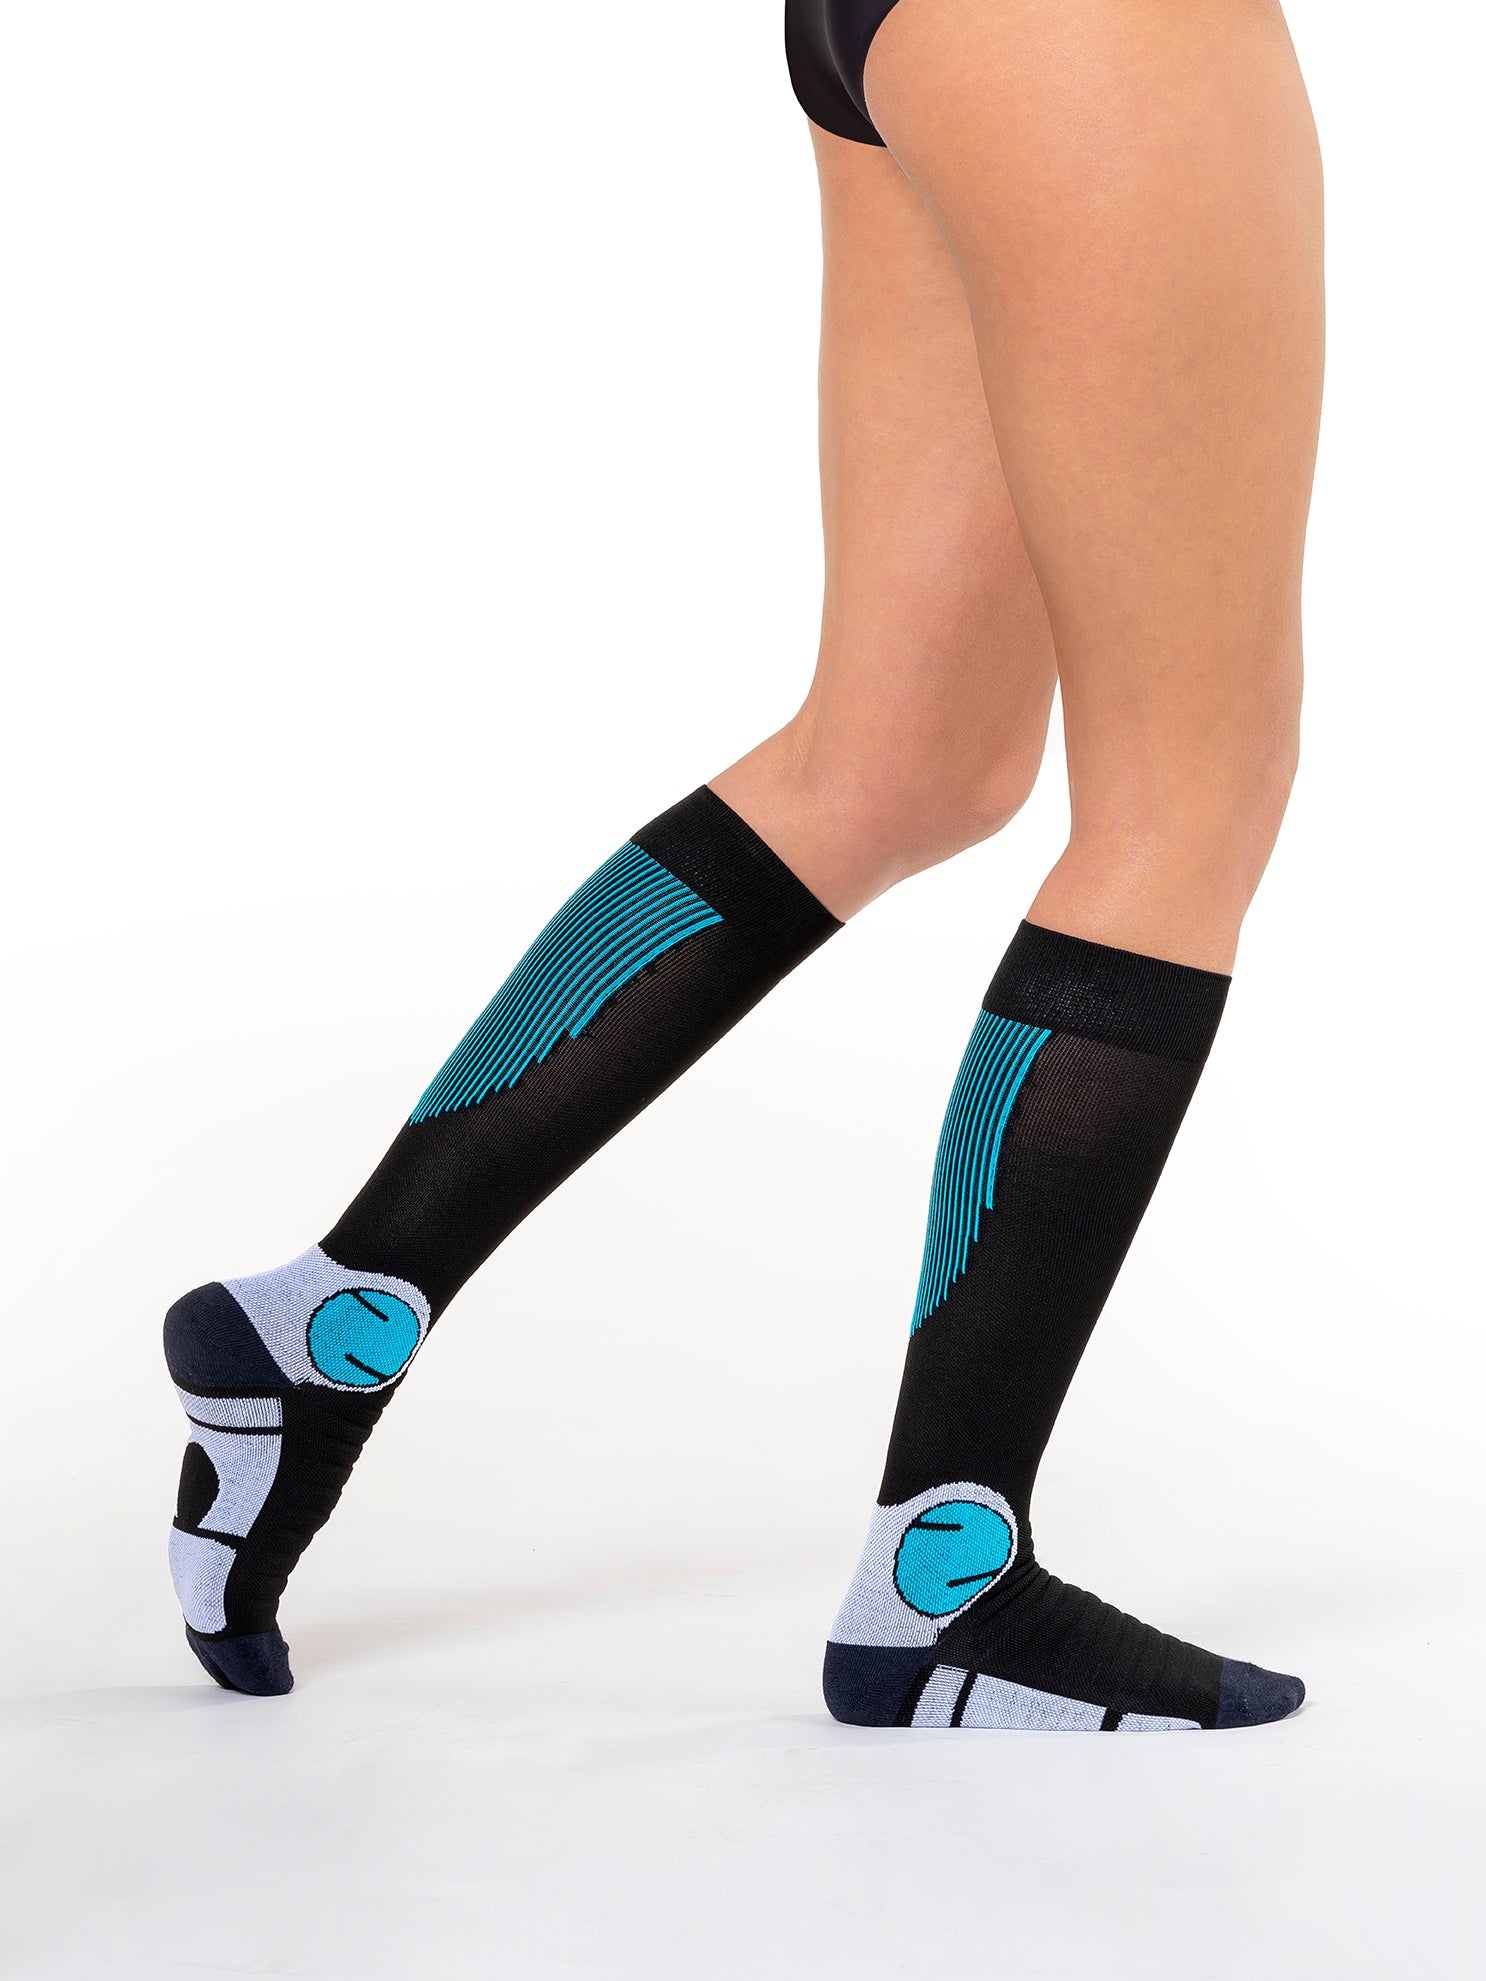 Ladies Work Compression Socks - Standing or Sitting For Long